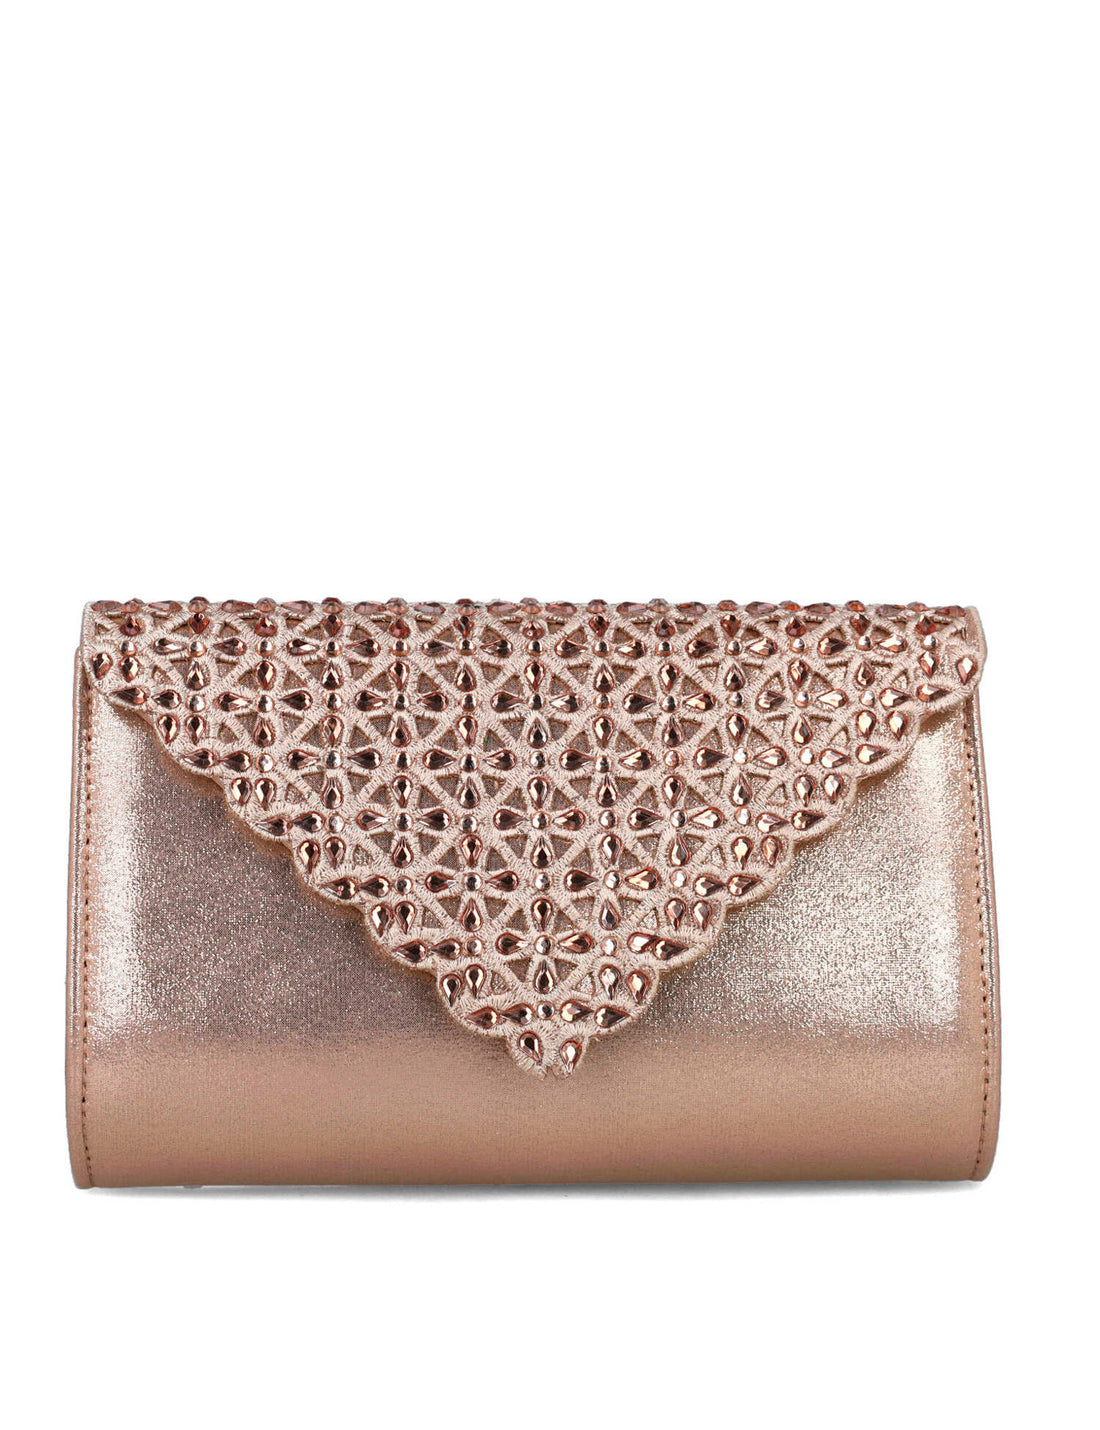 Gold Clutch With Embellished Flap_85540_38_01